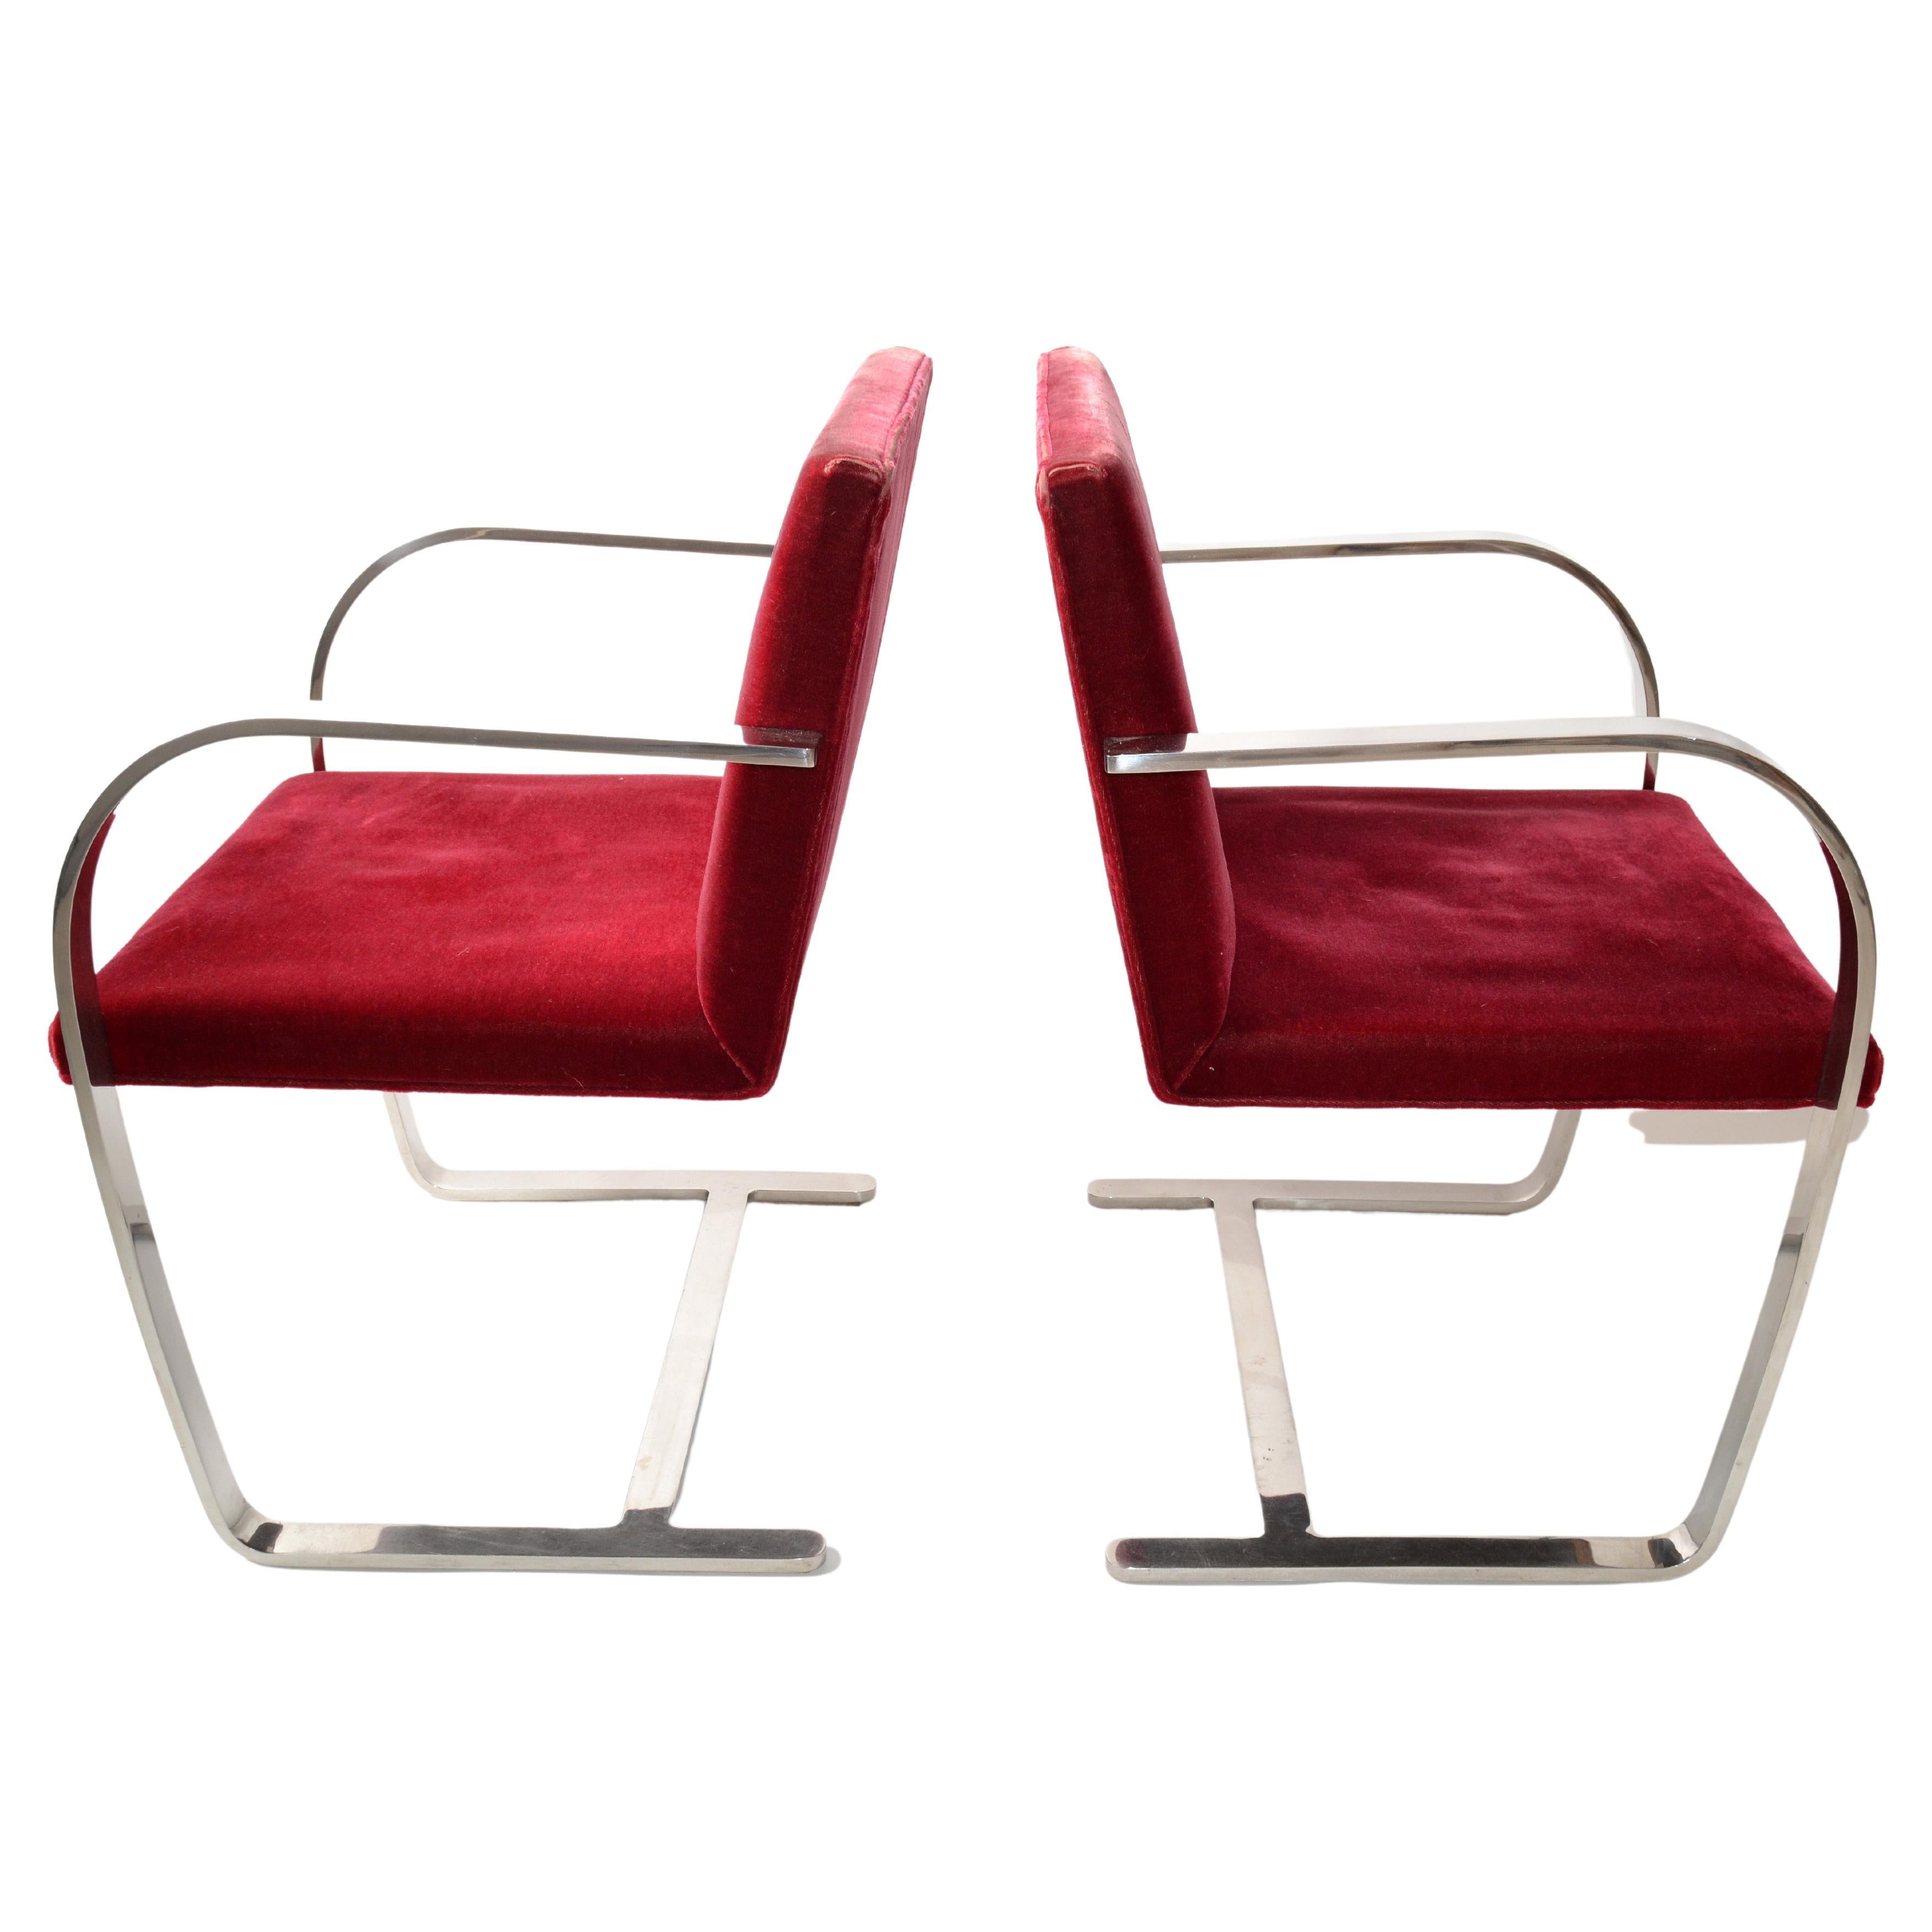 Mies Van Der Rohe for Knoll Stainless Steel Brno Chairs Red Velvet 1979, Pair For Sale